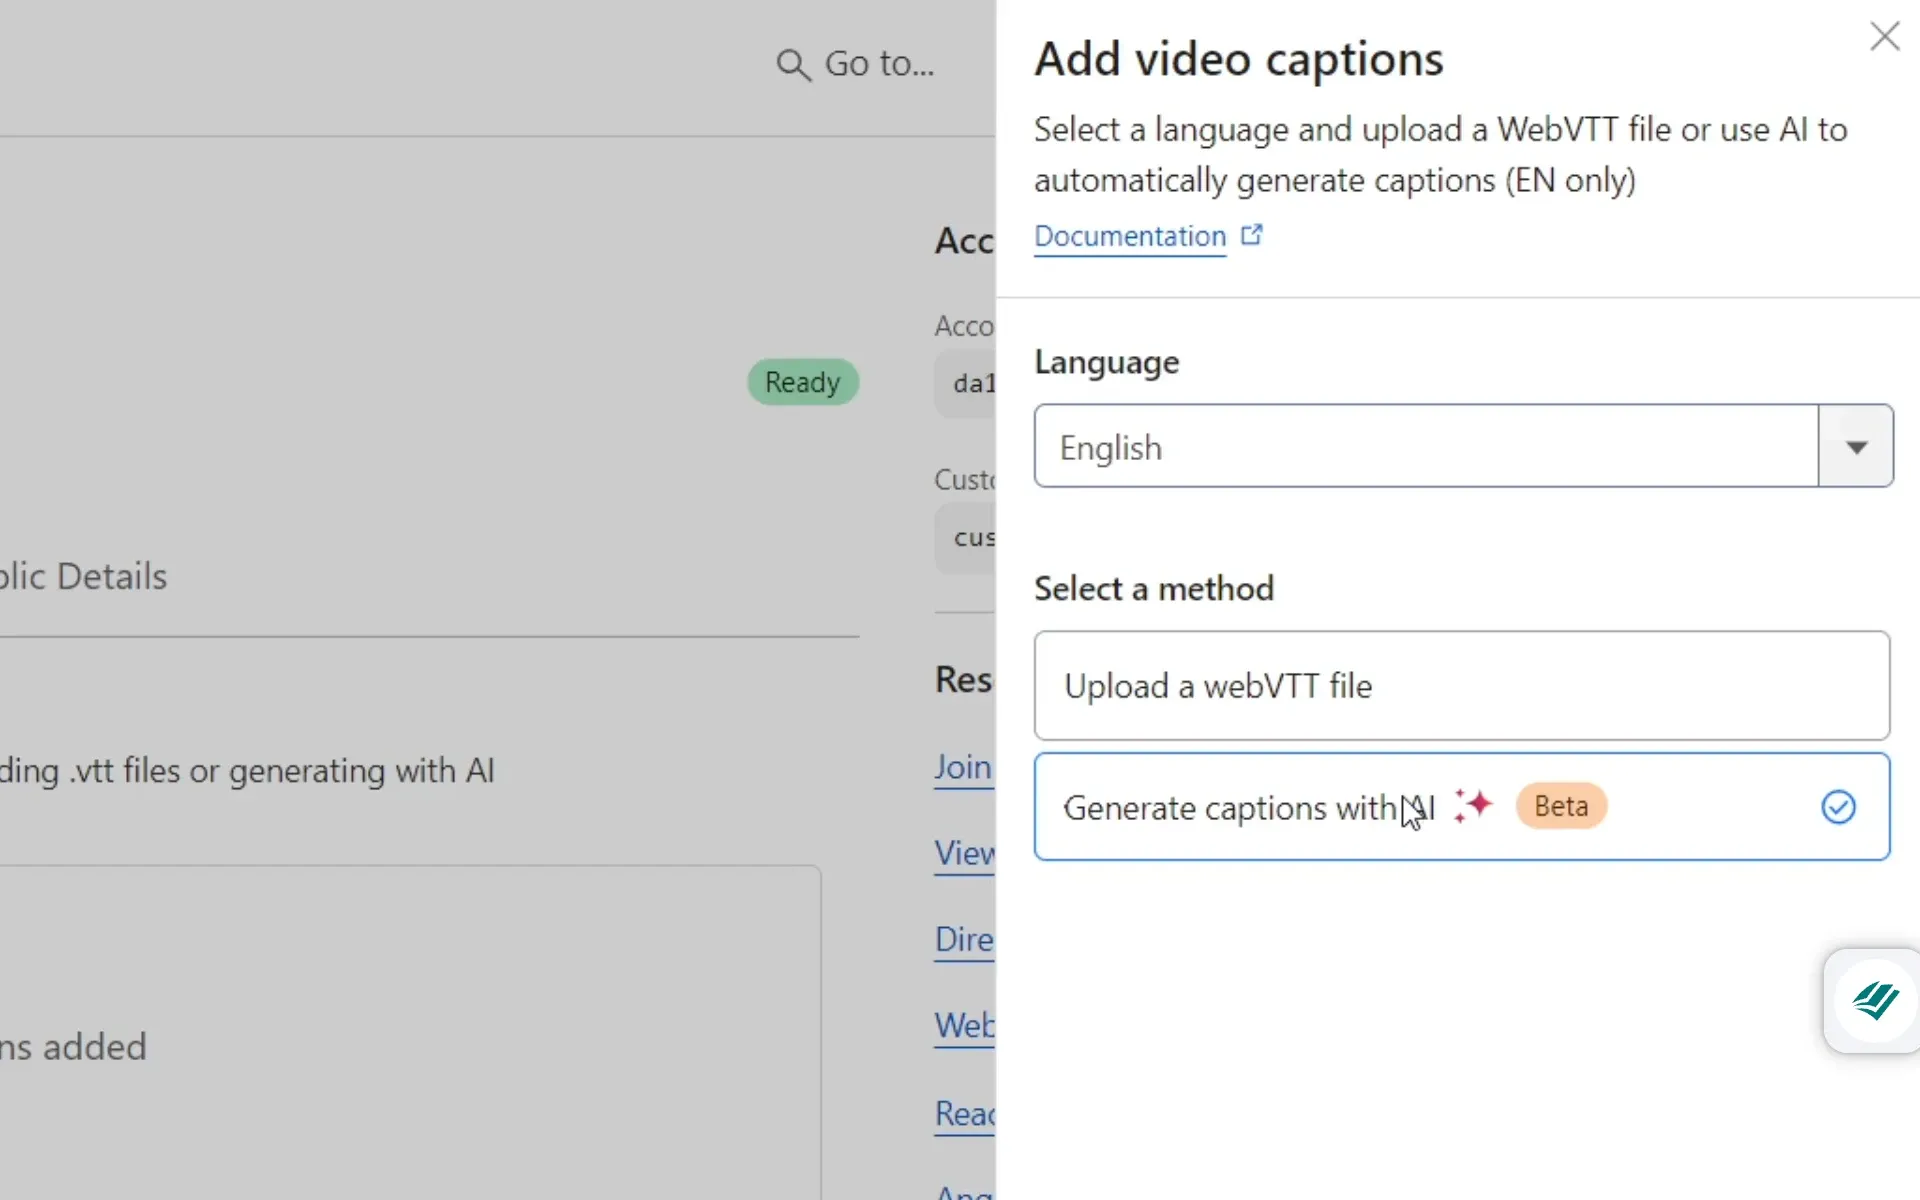 Add video captions with AI